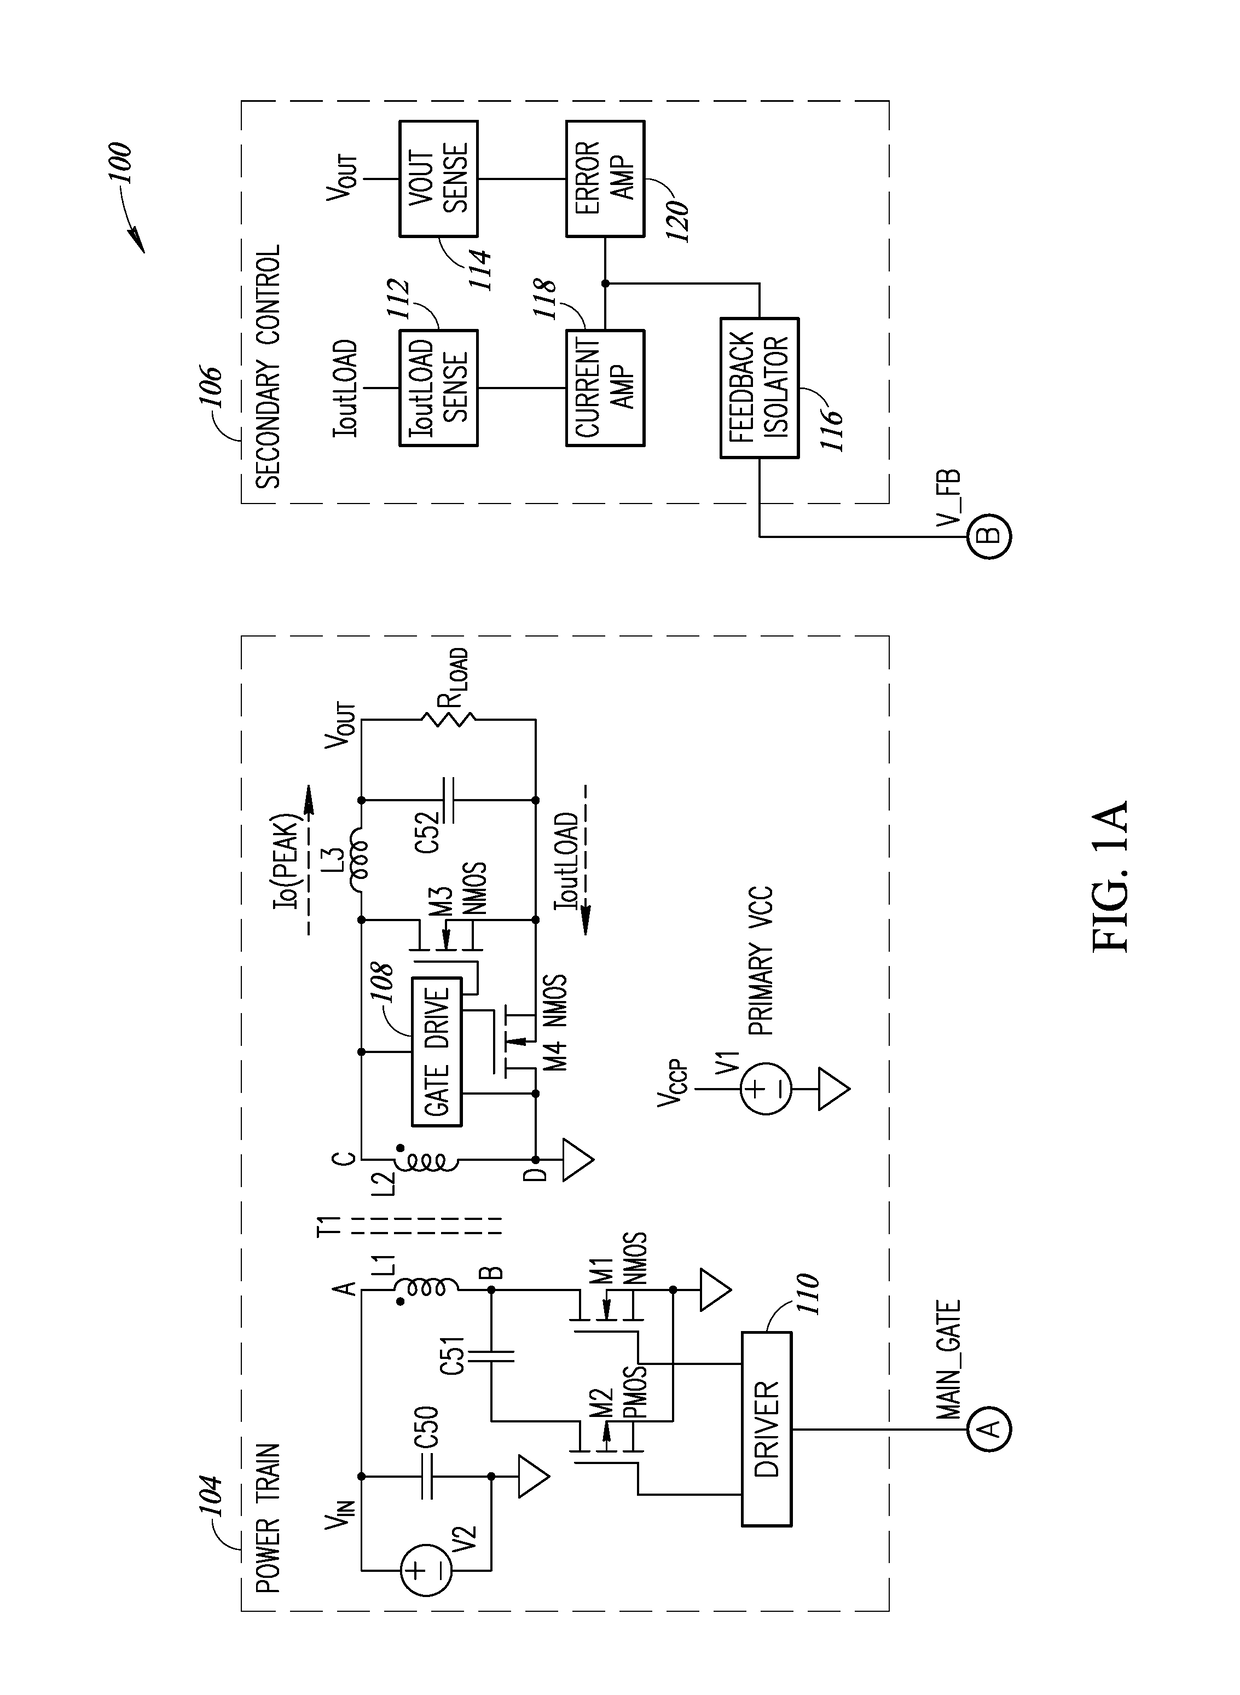 Radiation tolerant, analog latch peak current mode control for power converters